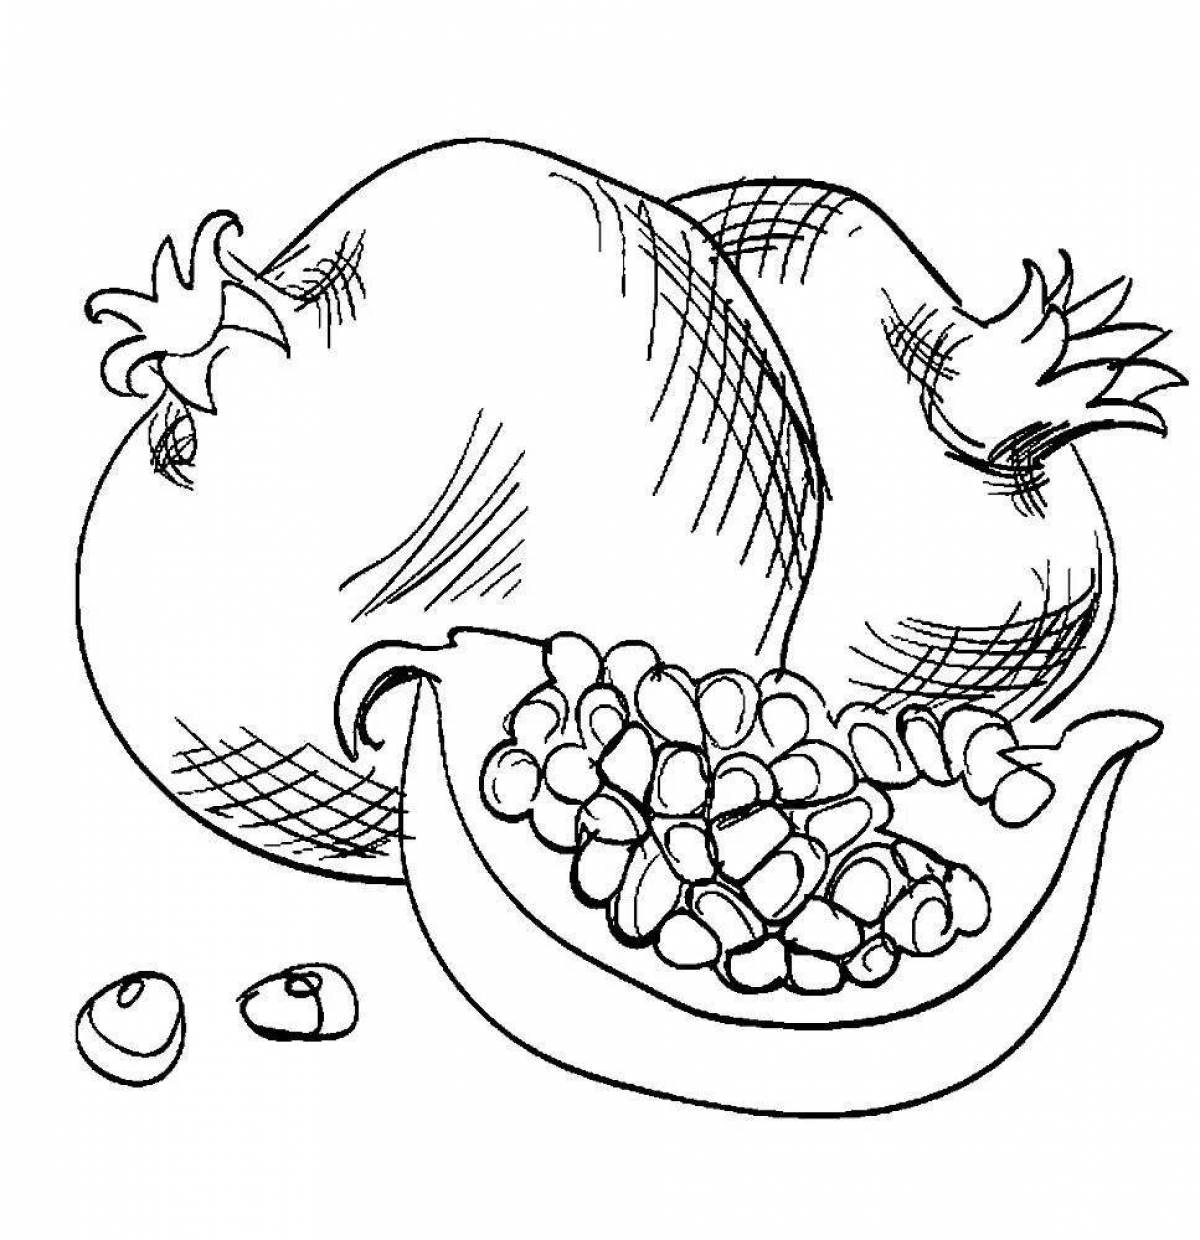 Playful pomegranate coloring page for kids